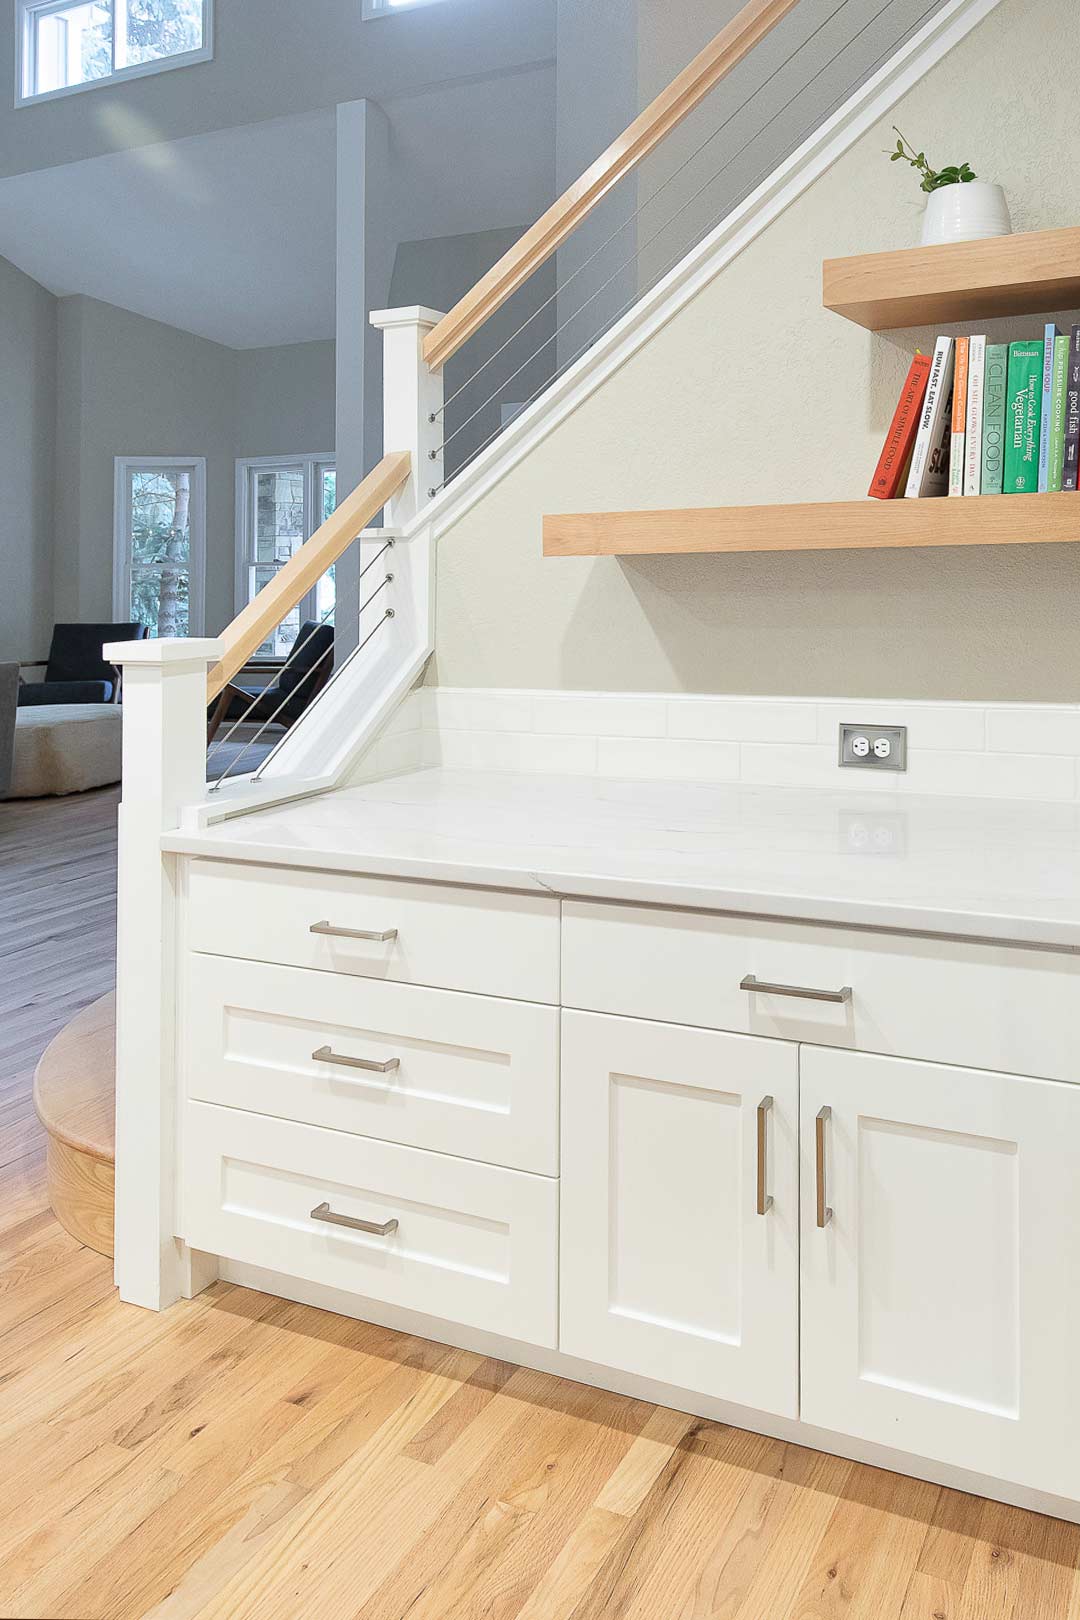 Custom built in cabinets and shelving that work seamlessly with the modern white oak and cable railing designed by Freestone Design-Build.